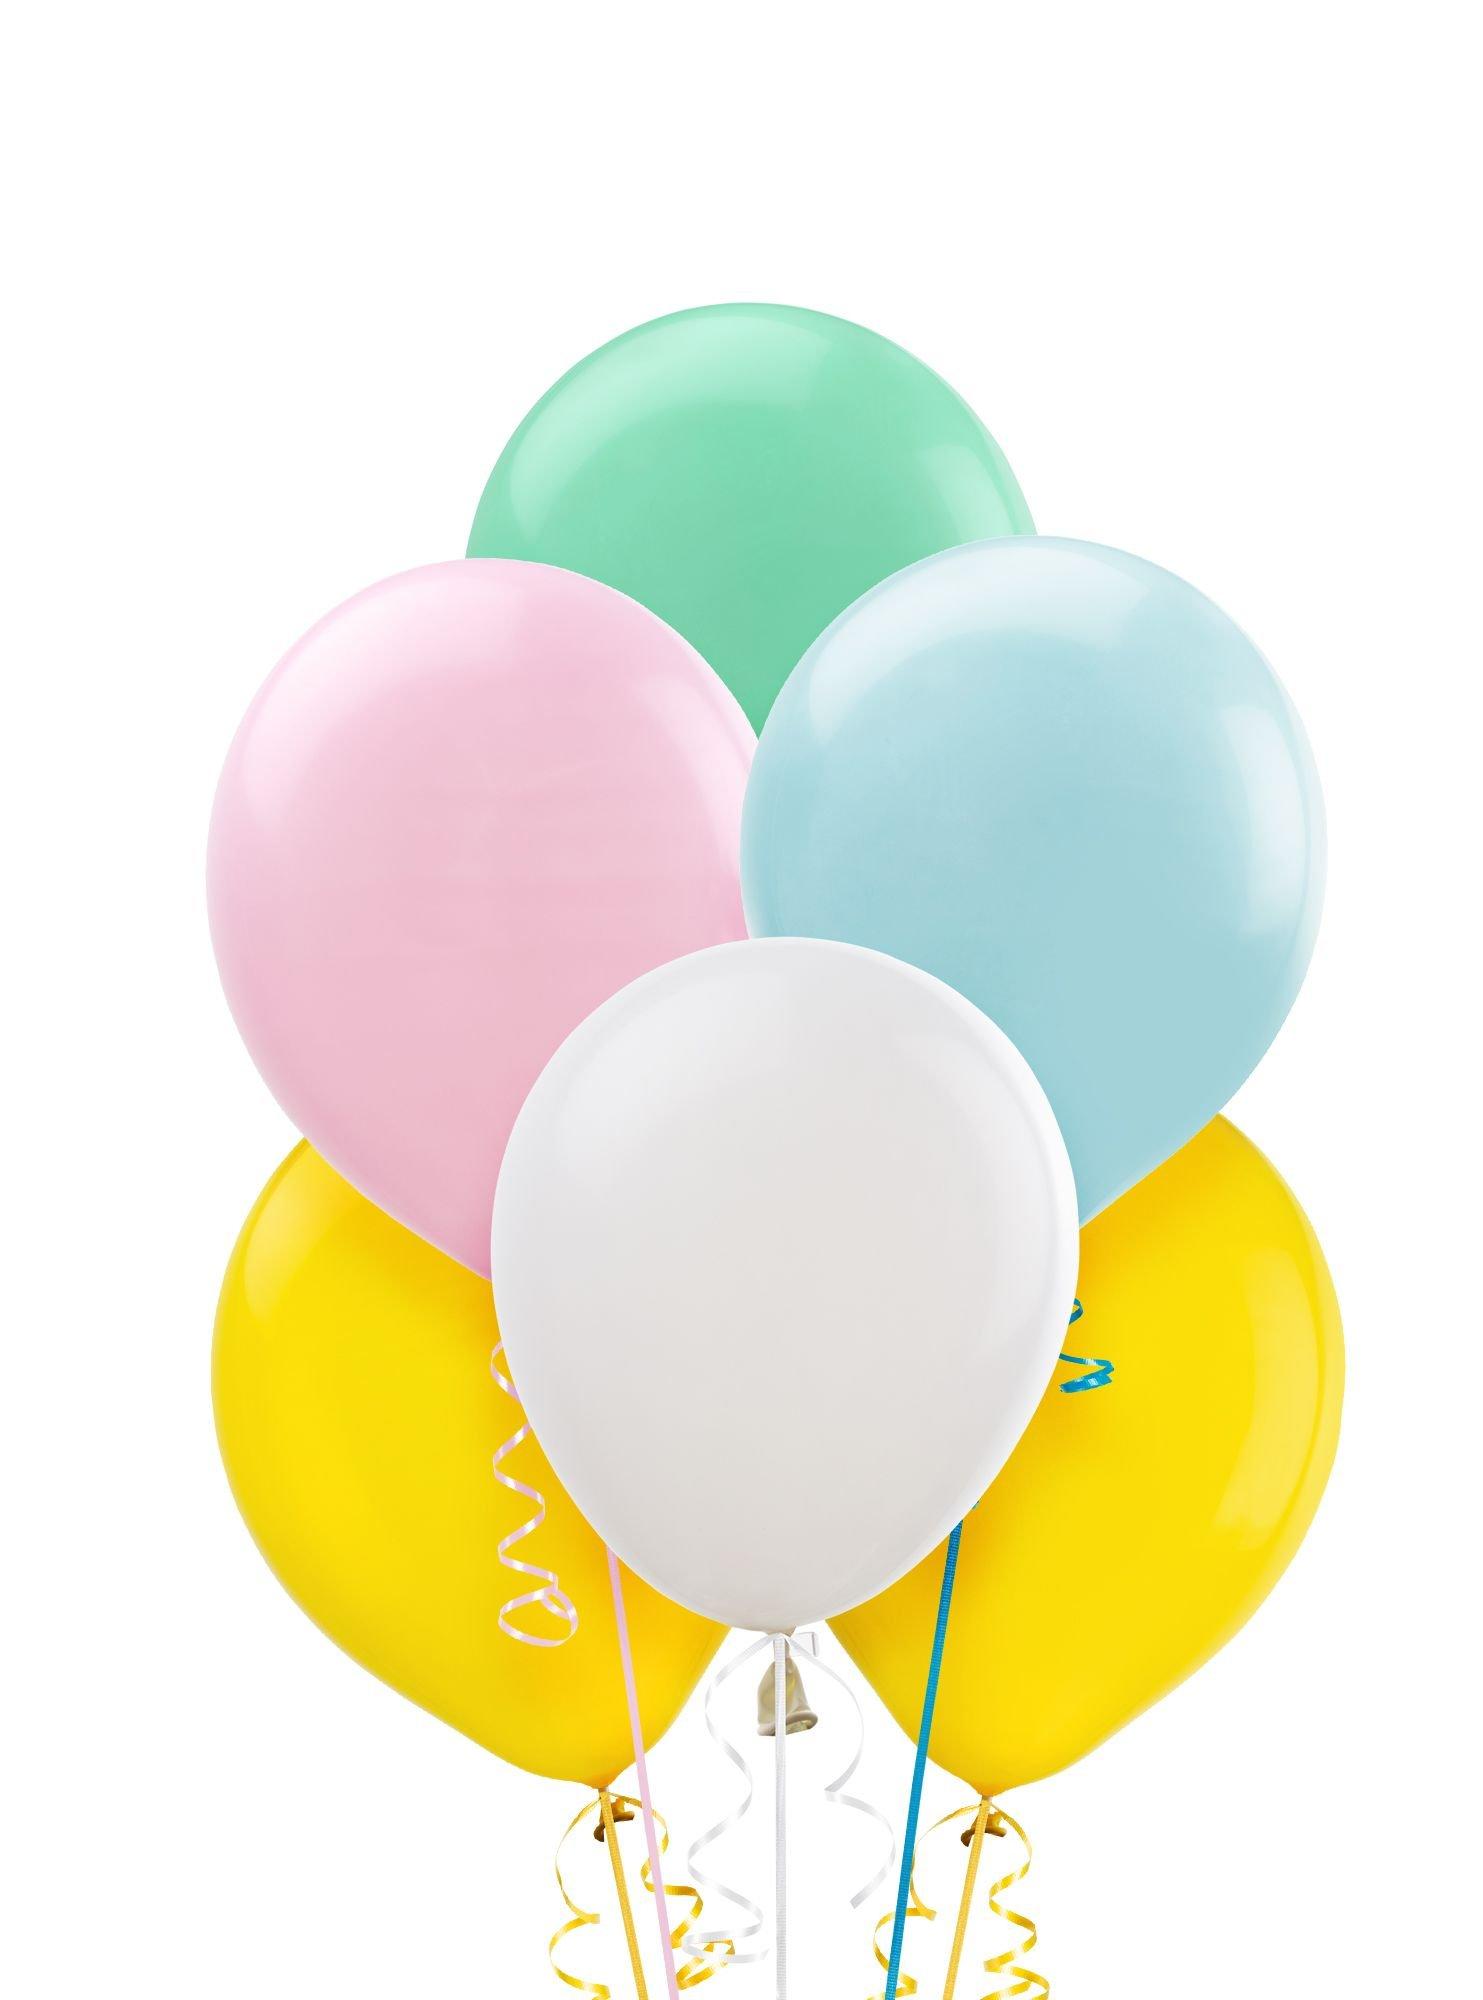 20ct, 9in, Balloons